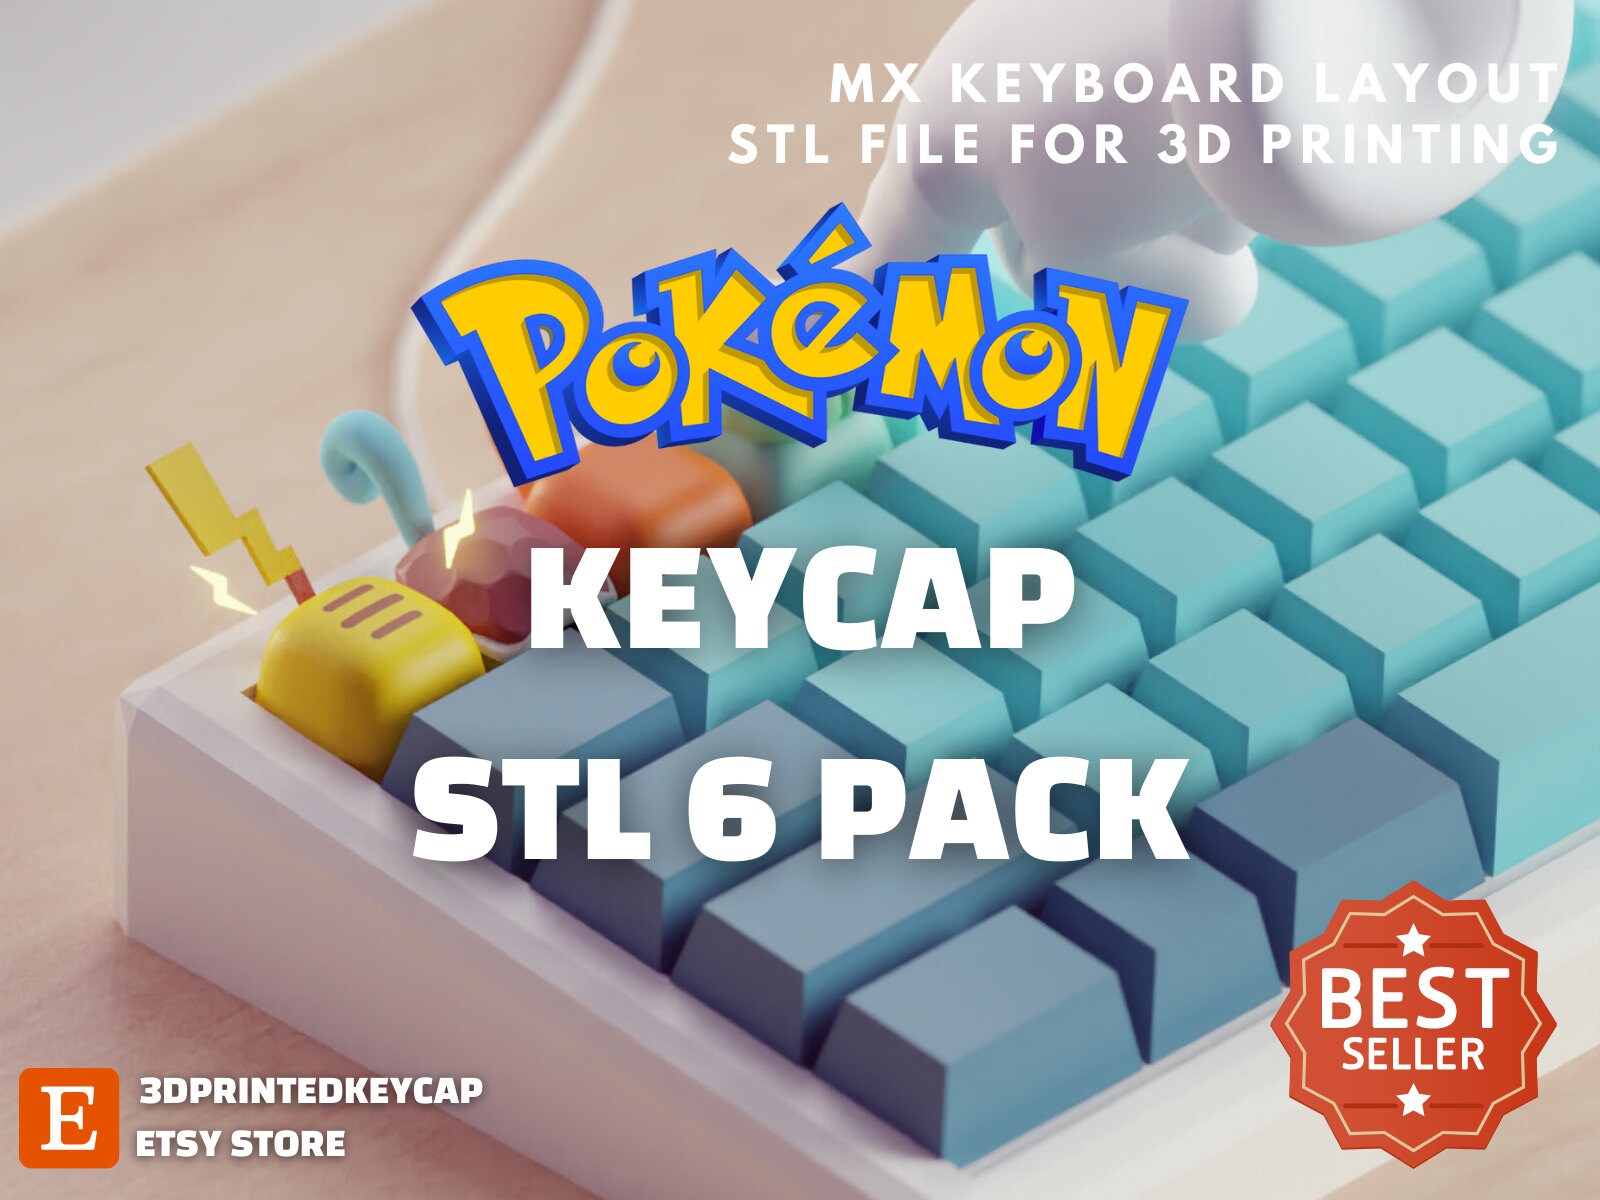 ⌨️ Best STL files of keycaps models to make with a 3D printer